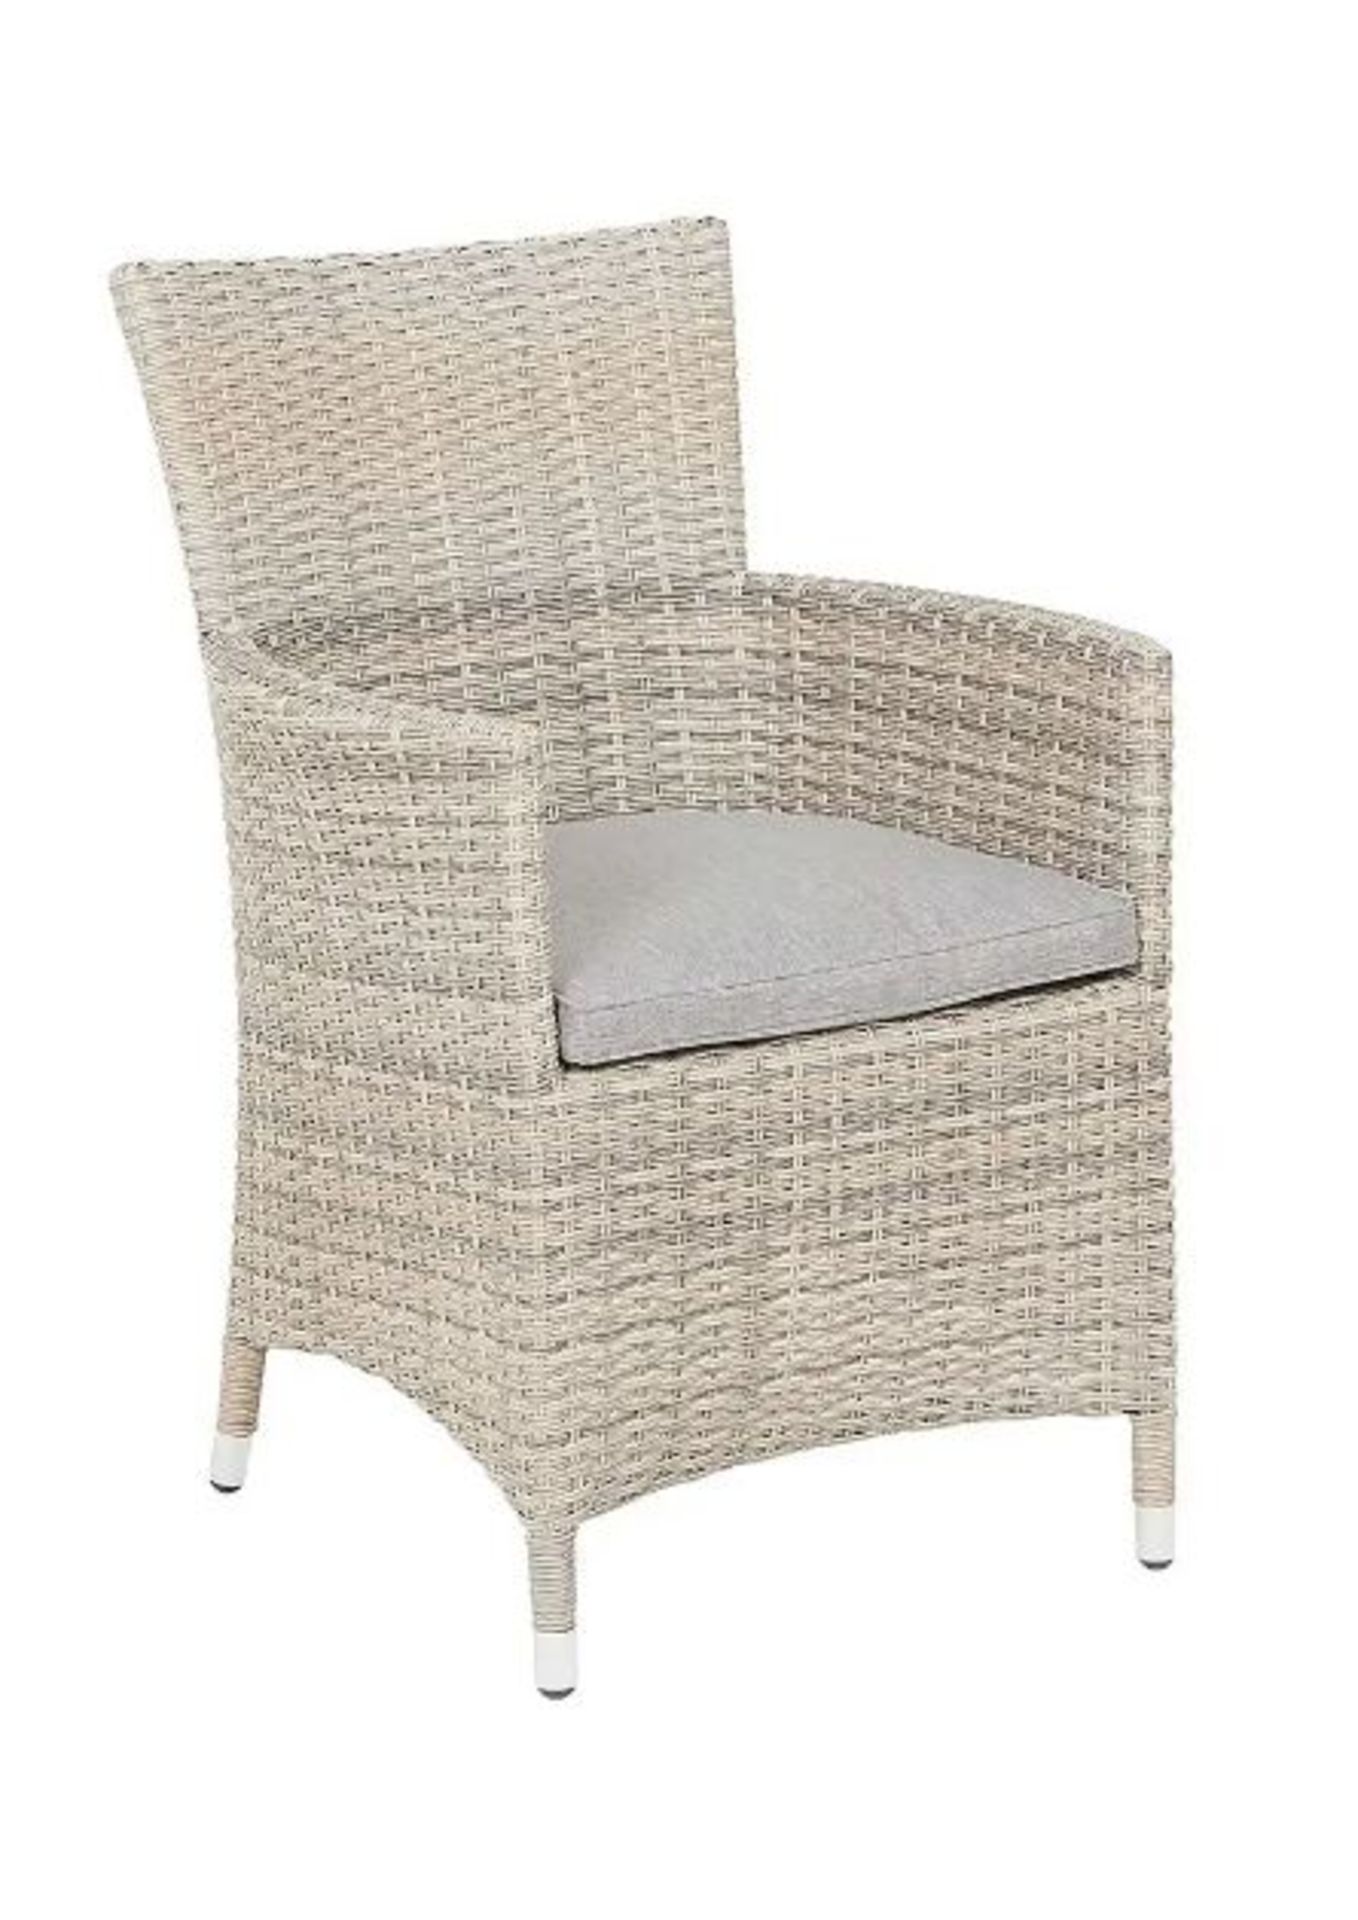 (R4F) 2x Hartman Florence Collection Rattan Effect Chairs (No Cushions). Units Appears Clean, Unus